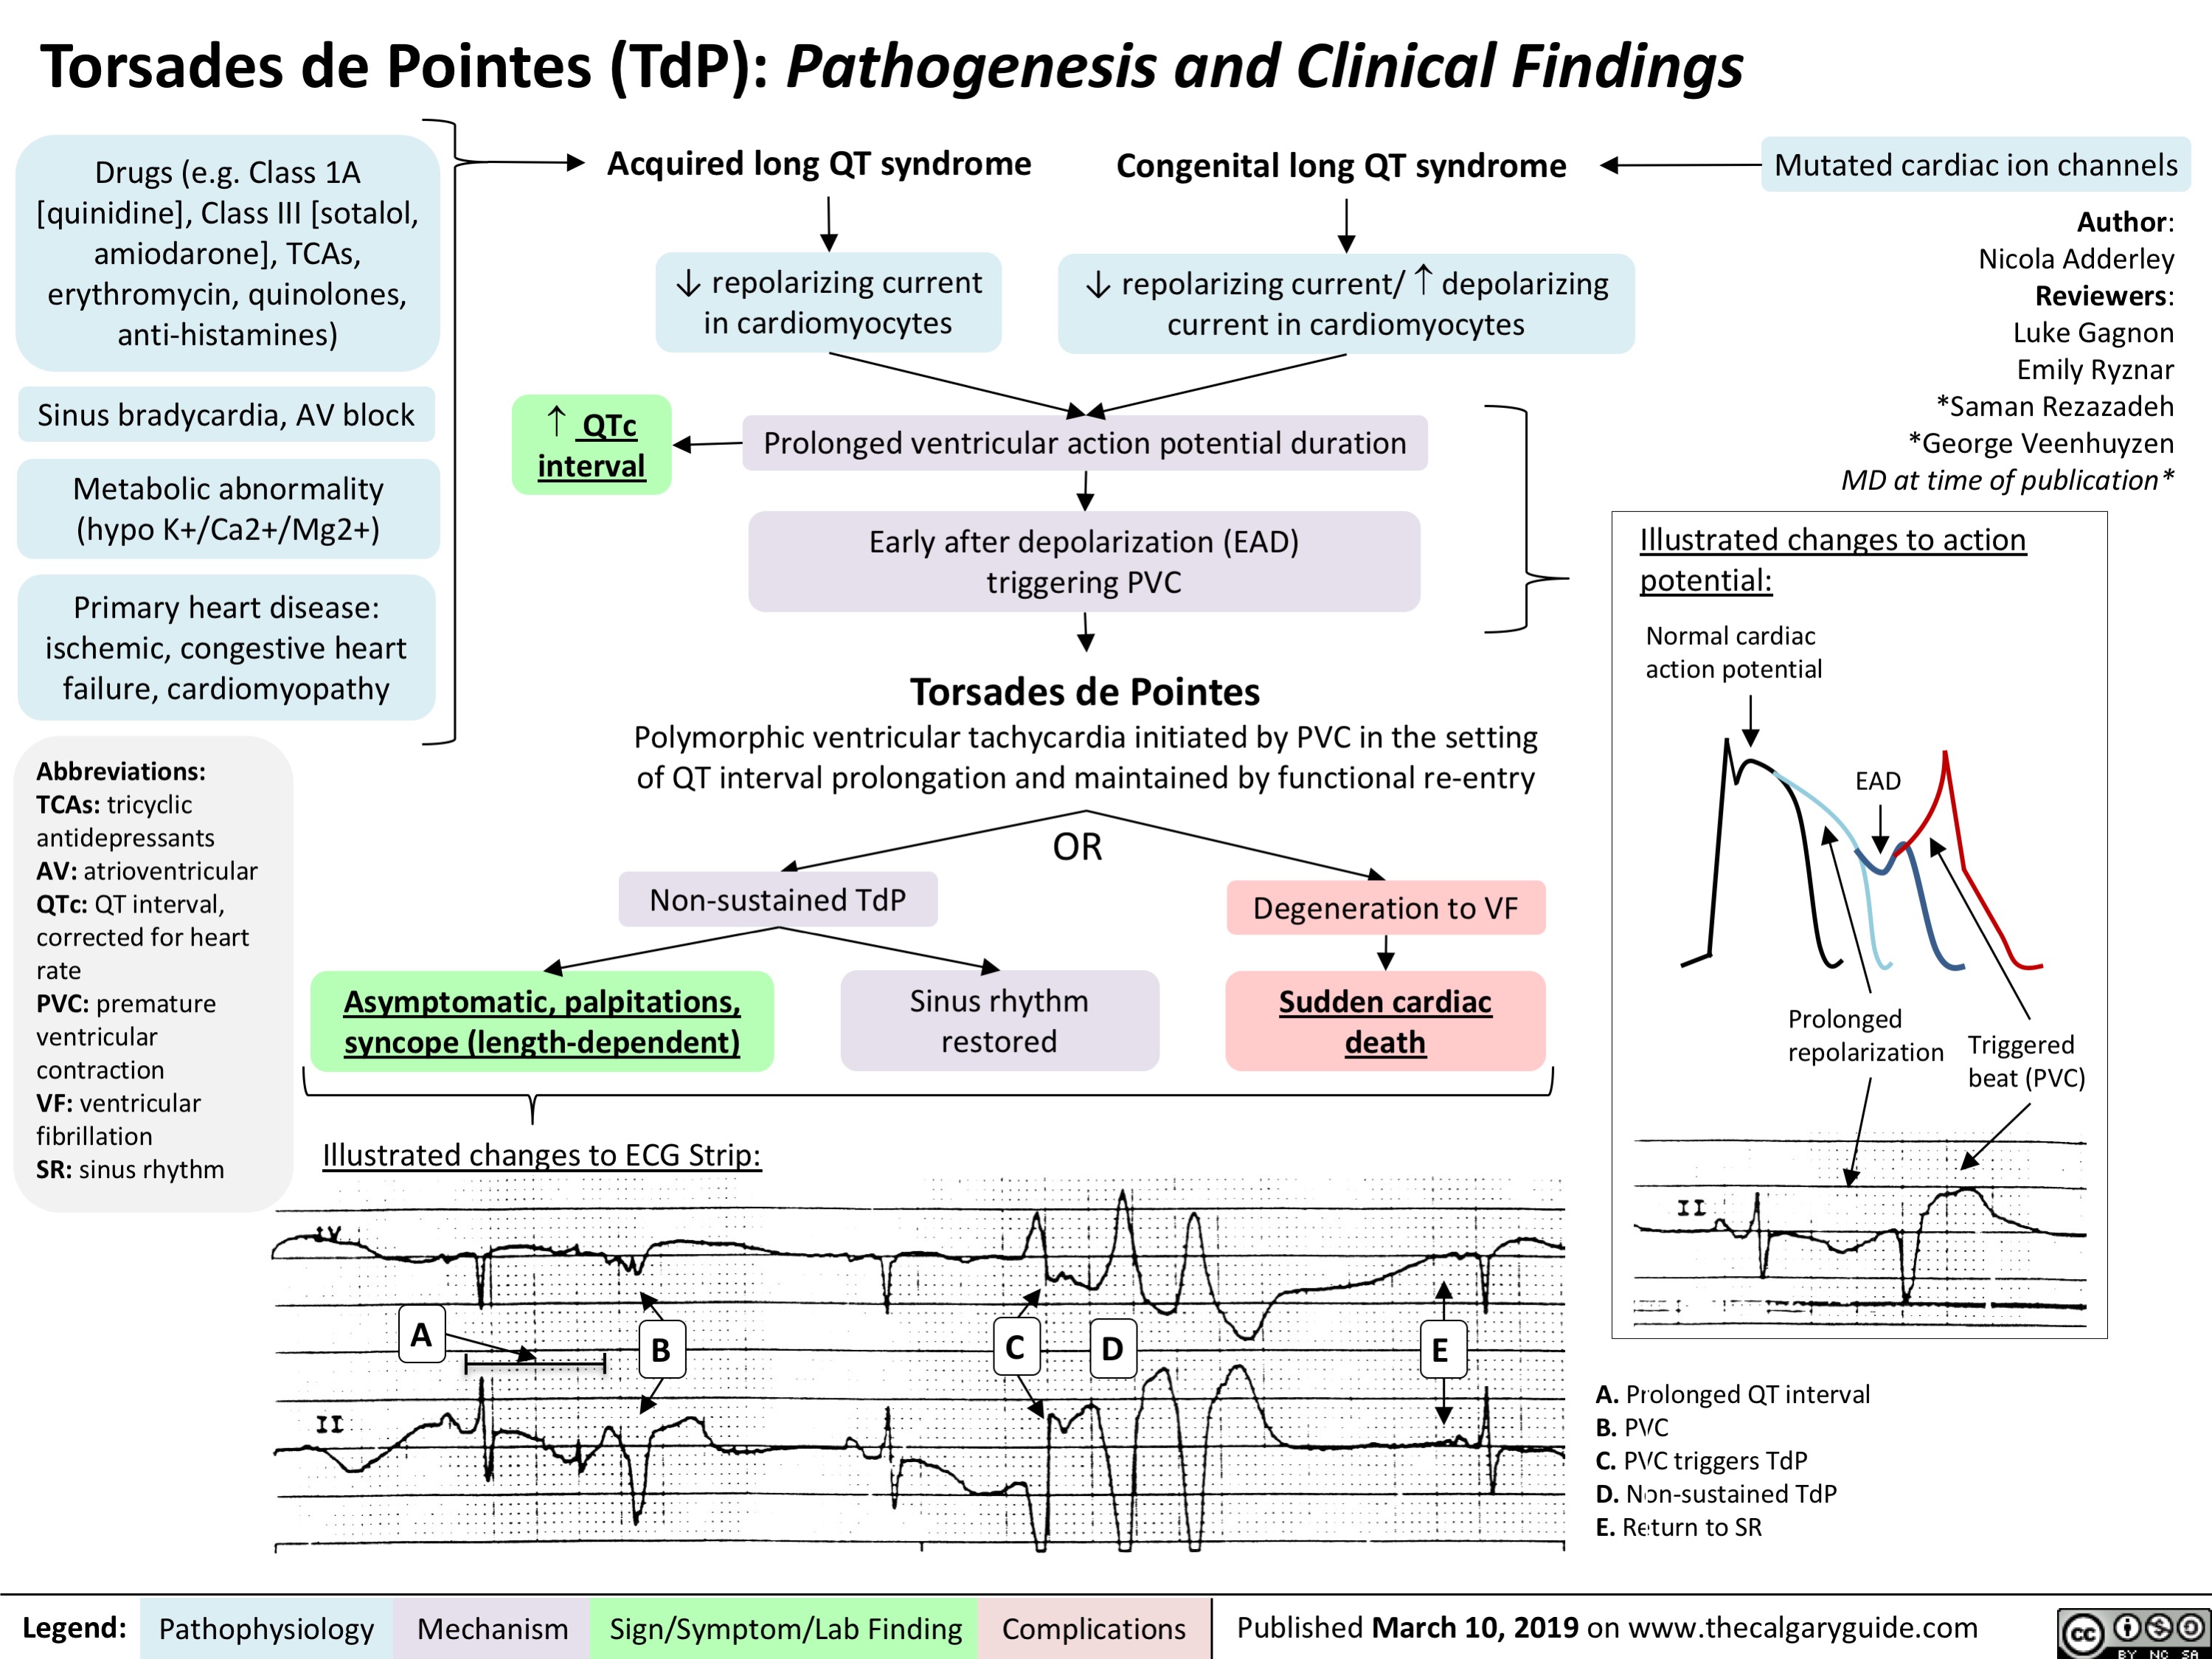 Torsades de Pointes (TdP): Pathogenesis and Clinical Findings
   Drugs (e.g. Class 1A [quinidine], Class III [sotalol,
amiodarone], TCAs, erythromycin, quinolones, anti-histamines)
Sinus bradycardia, AV block
Metabolic abnormality (hypo K+/Ca2+/Mg2+)
Primary heart disease: ischemic, congestive heart failure, cardiomyopathy
Acquired long QT syndrome
Congenital long QT syndrome
↓ repolarizing current/ ­ depolarizing current in cardiomyocytes
Mutated cardiac ion channels
Author: Nicola Adderley Reviewers: Luke Gagnon Emily Ryznar *Saman Rezazadeh *George Veenhuyzen MD at time of publication*
      ↓ repolarizing current in cardiomyocytes
    ­ QTc interval
Prolonged ventricular action potential duration
Early after depolarization (EAD) triggering PVC
Torsades de Pointes
         Illustrated changes to action potential:
Normal cardiac action potential
EAD
         Abbreviations: TCAs: tricyclic antidepressants AV: atrioventricular QTc: QT interval, corrected for heart rate
PVC: premature ventricular contraction
VF: ventricular fibrillation
SR: sinus rhythm
Polymorphic ventricular tachycardia initiated by PVC in the setting of QT interval prolongation and maintained by functional re-entry
      Non-sustained TdP
Asymptomatic, palpitations, syncope (length-dependent)
Illustrated changes to ECG Strip:
OR
Sinus rhythm restored
Degeneration to VF
Sudden cardiac death
       Prolonged repolarization
Triggered beat (PVC)
           A
BCDE
              A. Prolonged QT interval B. PVC
C. PVC triggers TdP
D. Non-sustained TdP
E. Return to SR
   Legend:
 Pathophysiology
 Mechanism
Sign/Symptom/Lab Finding
  Complications
Published March 10, 2019 on www.thecalgaryguide.com
   